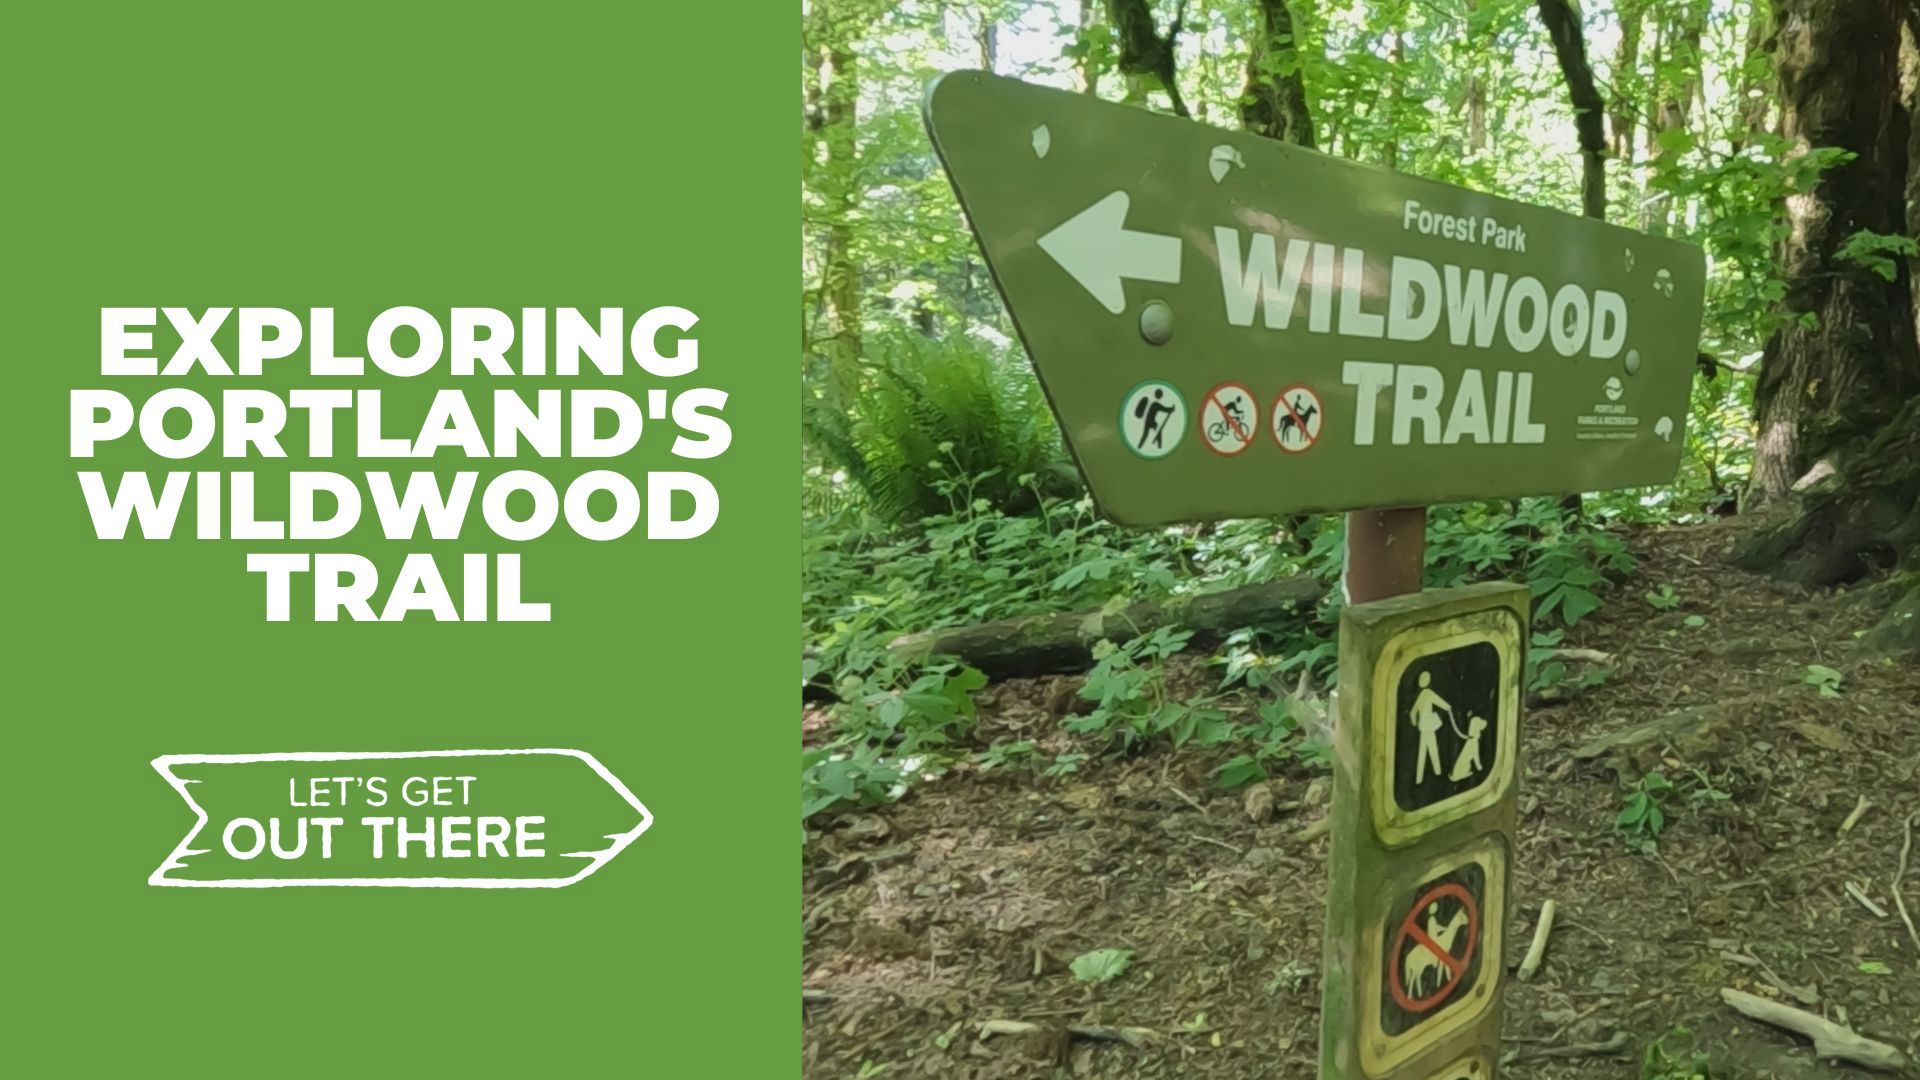 Tucked away in Portland’s Forest Park is the well-traveled Wildwood Trail. It’s a perfect place to unplug, but it helps to get there early.